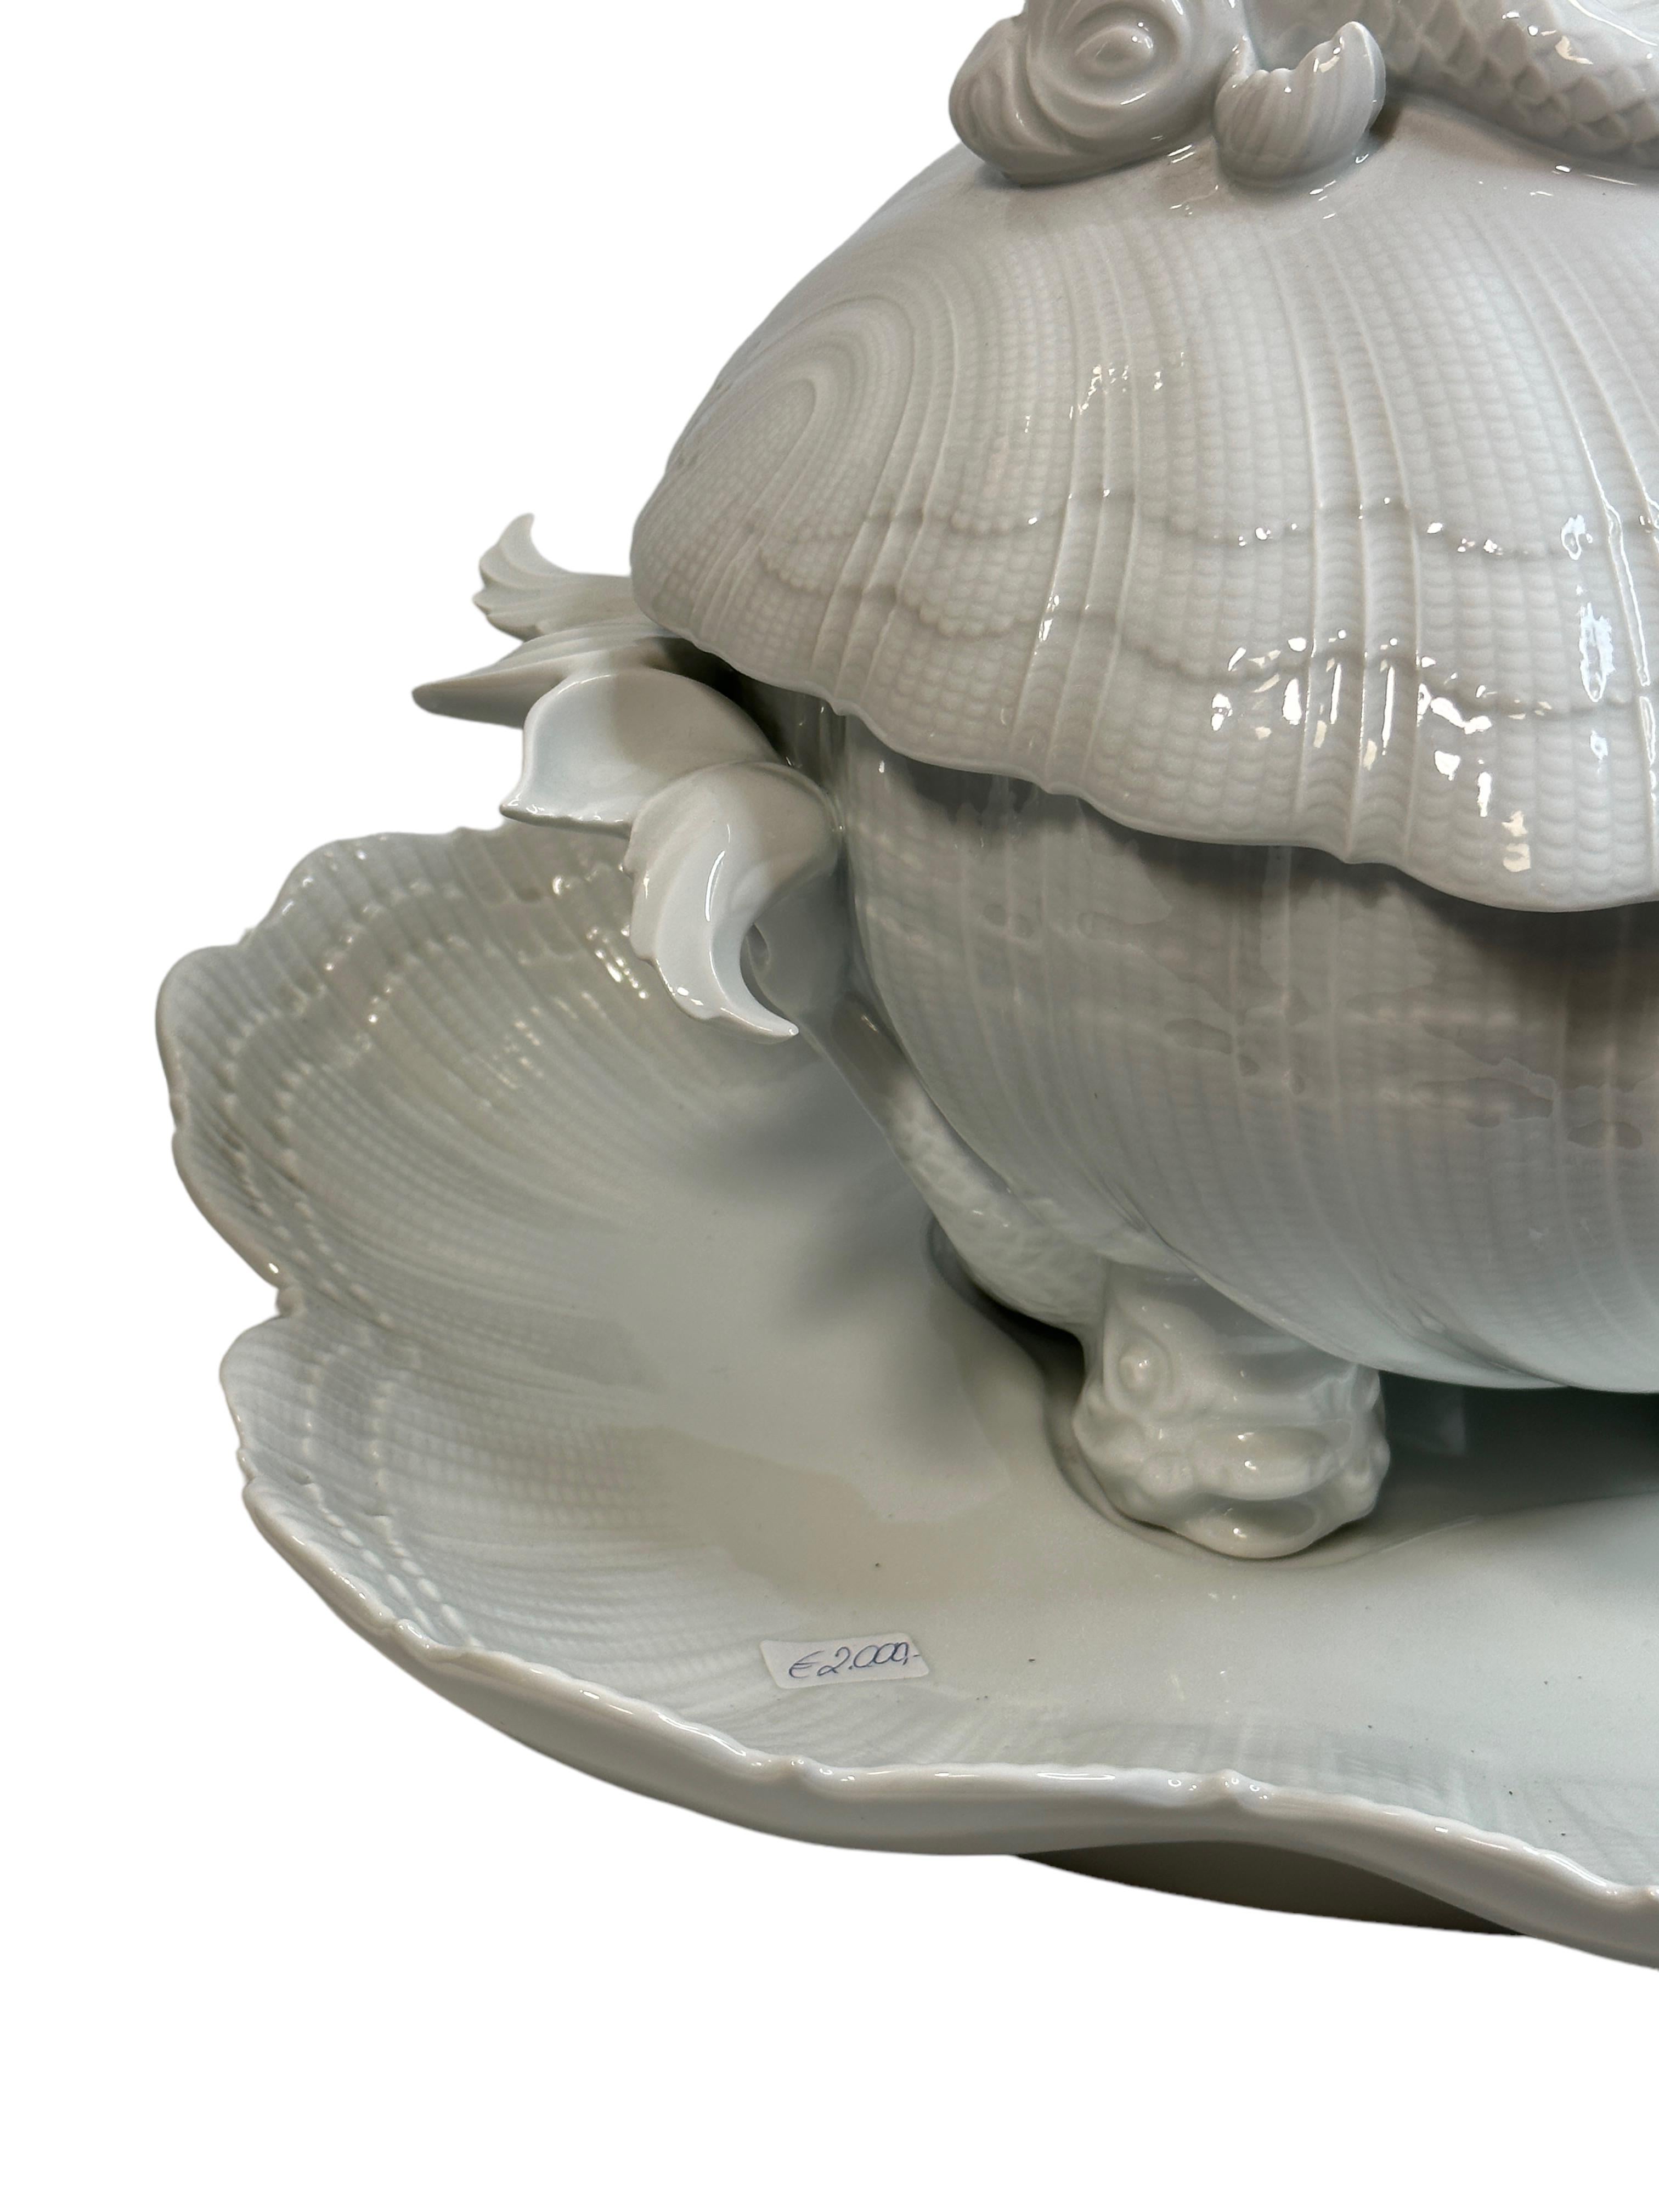 Exceptional Shell Shaped Limoges China Porcelain Soup Tureen with Dolphin Decor For Sale 1